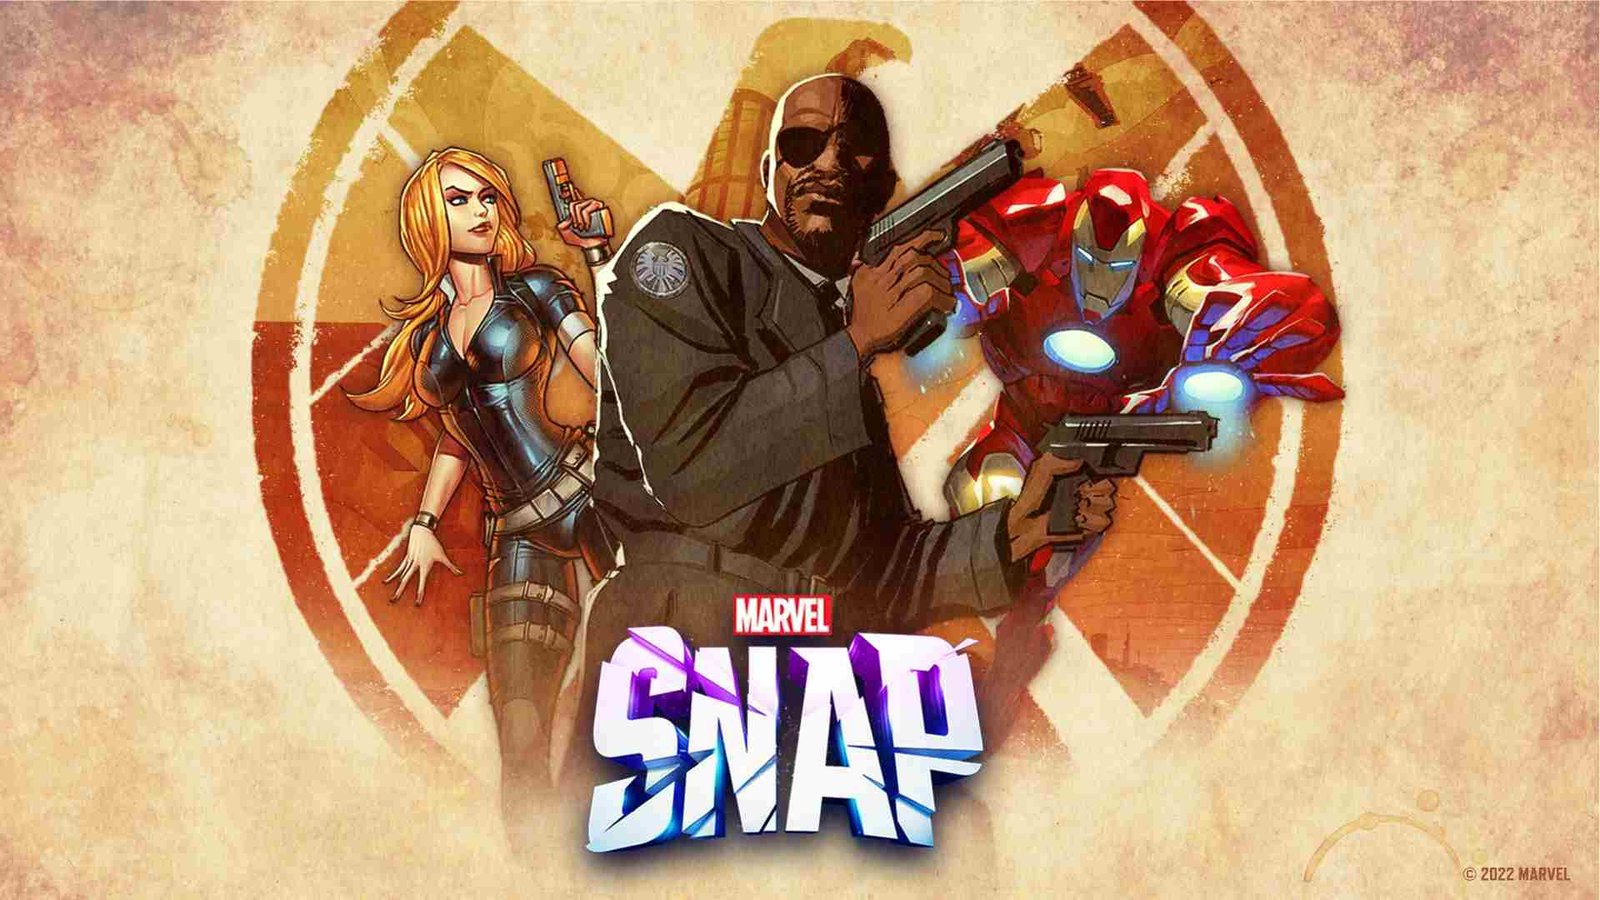 Does Marvel Snap support Cross Progression?